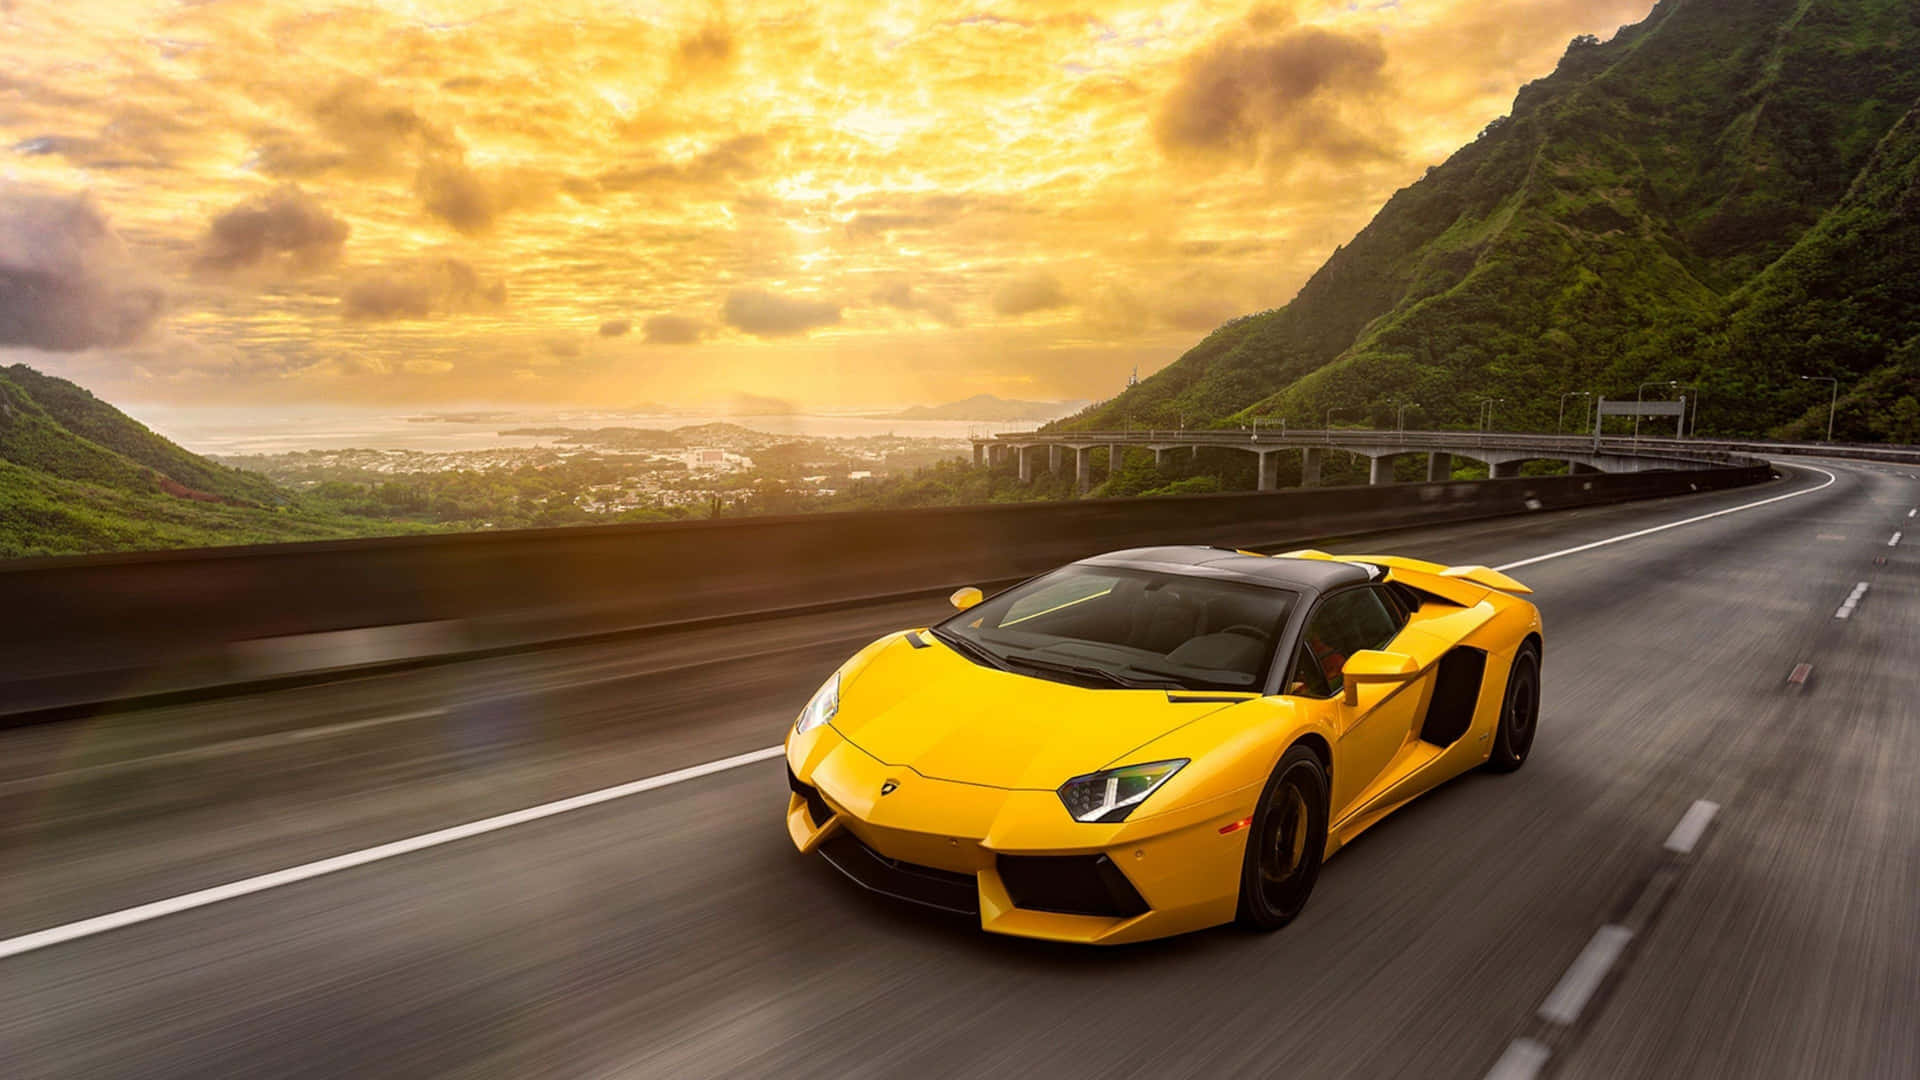 A Yellow Sports Car Driving On A Highway In The Mountains